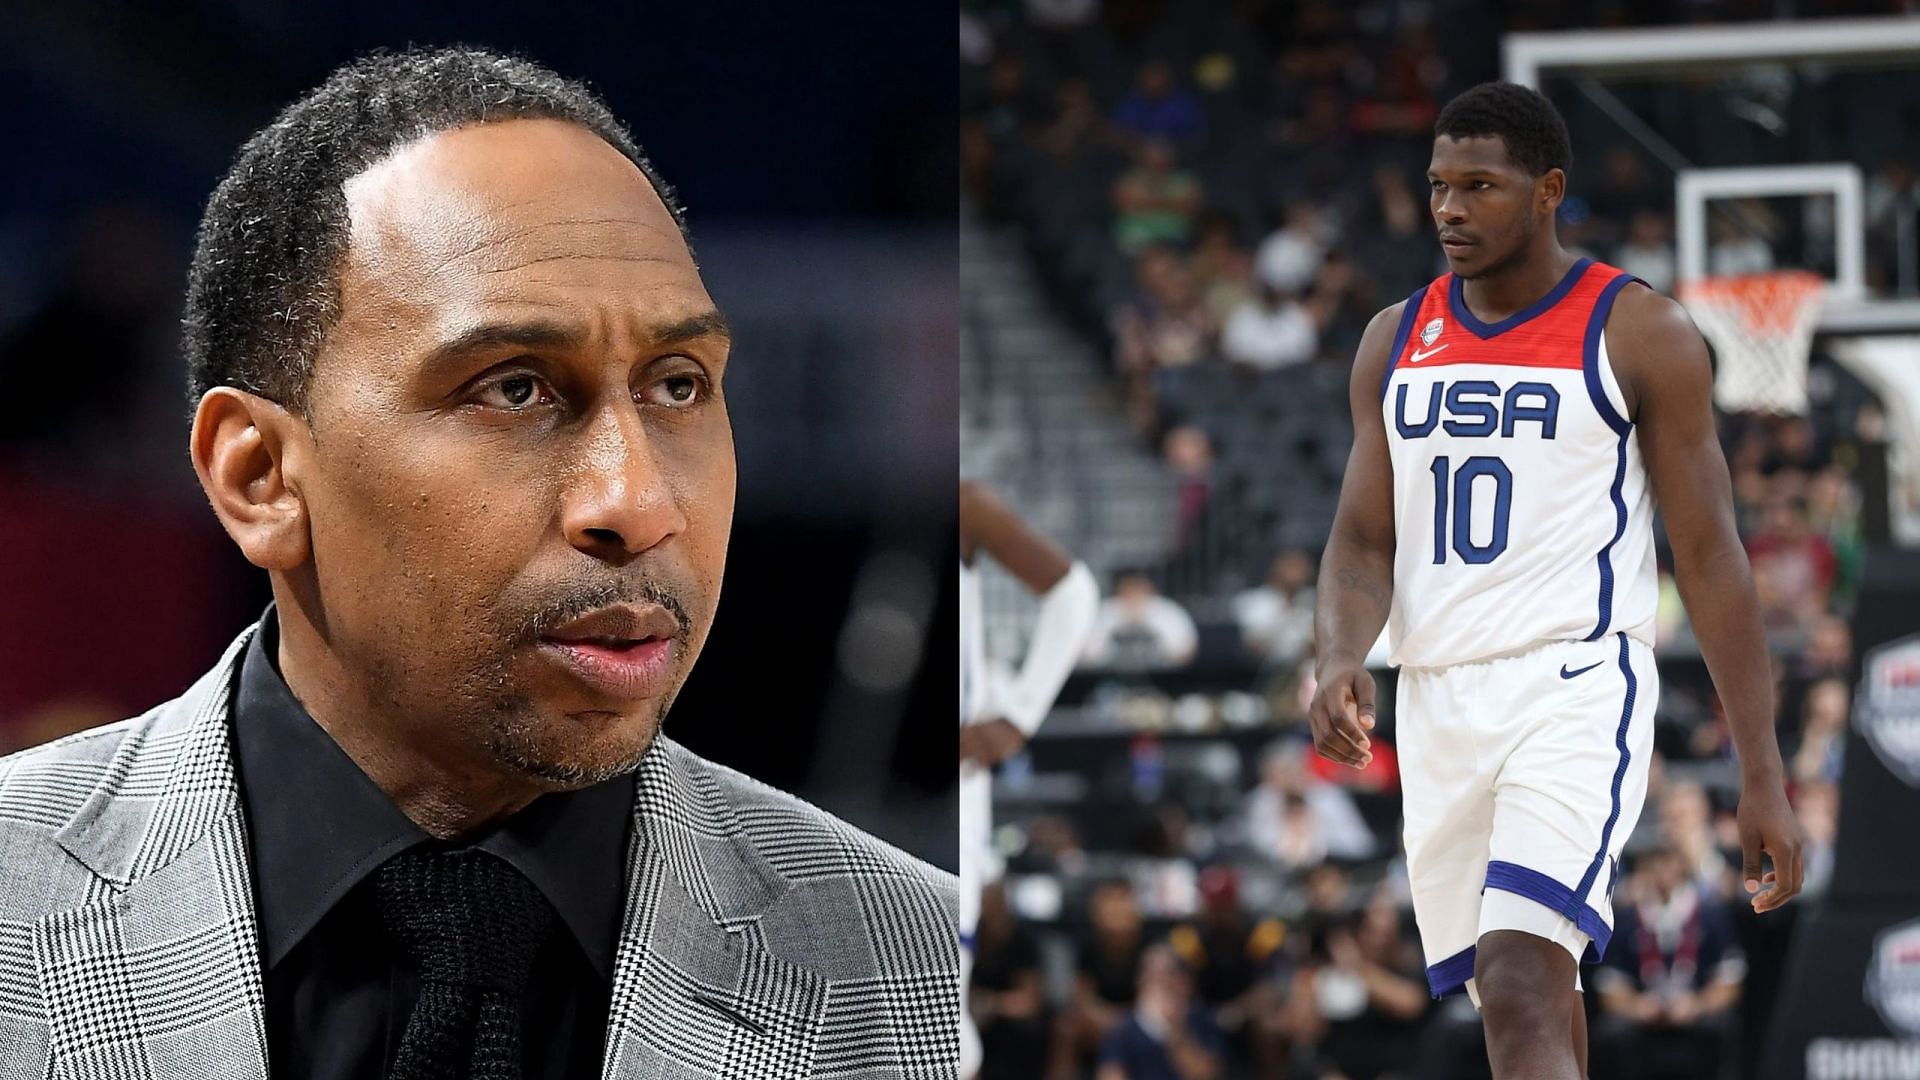 Stephen A. Smith tells fans what Anthony Edwards needs to work on